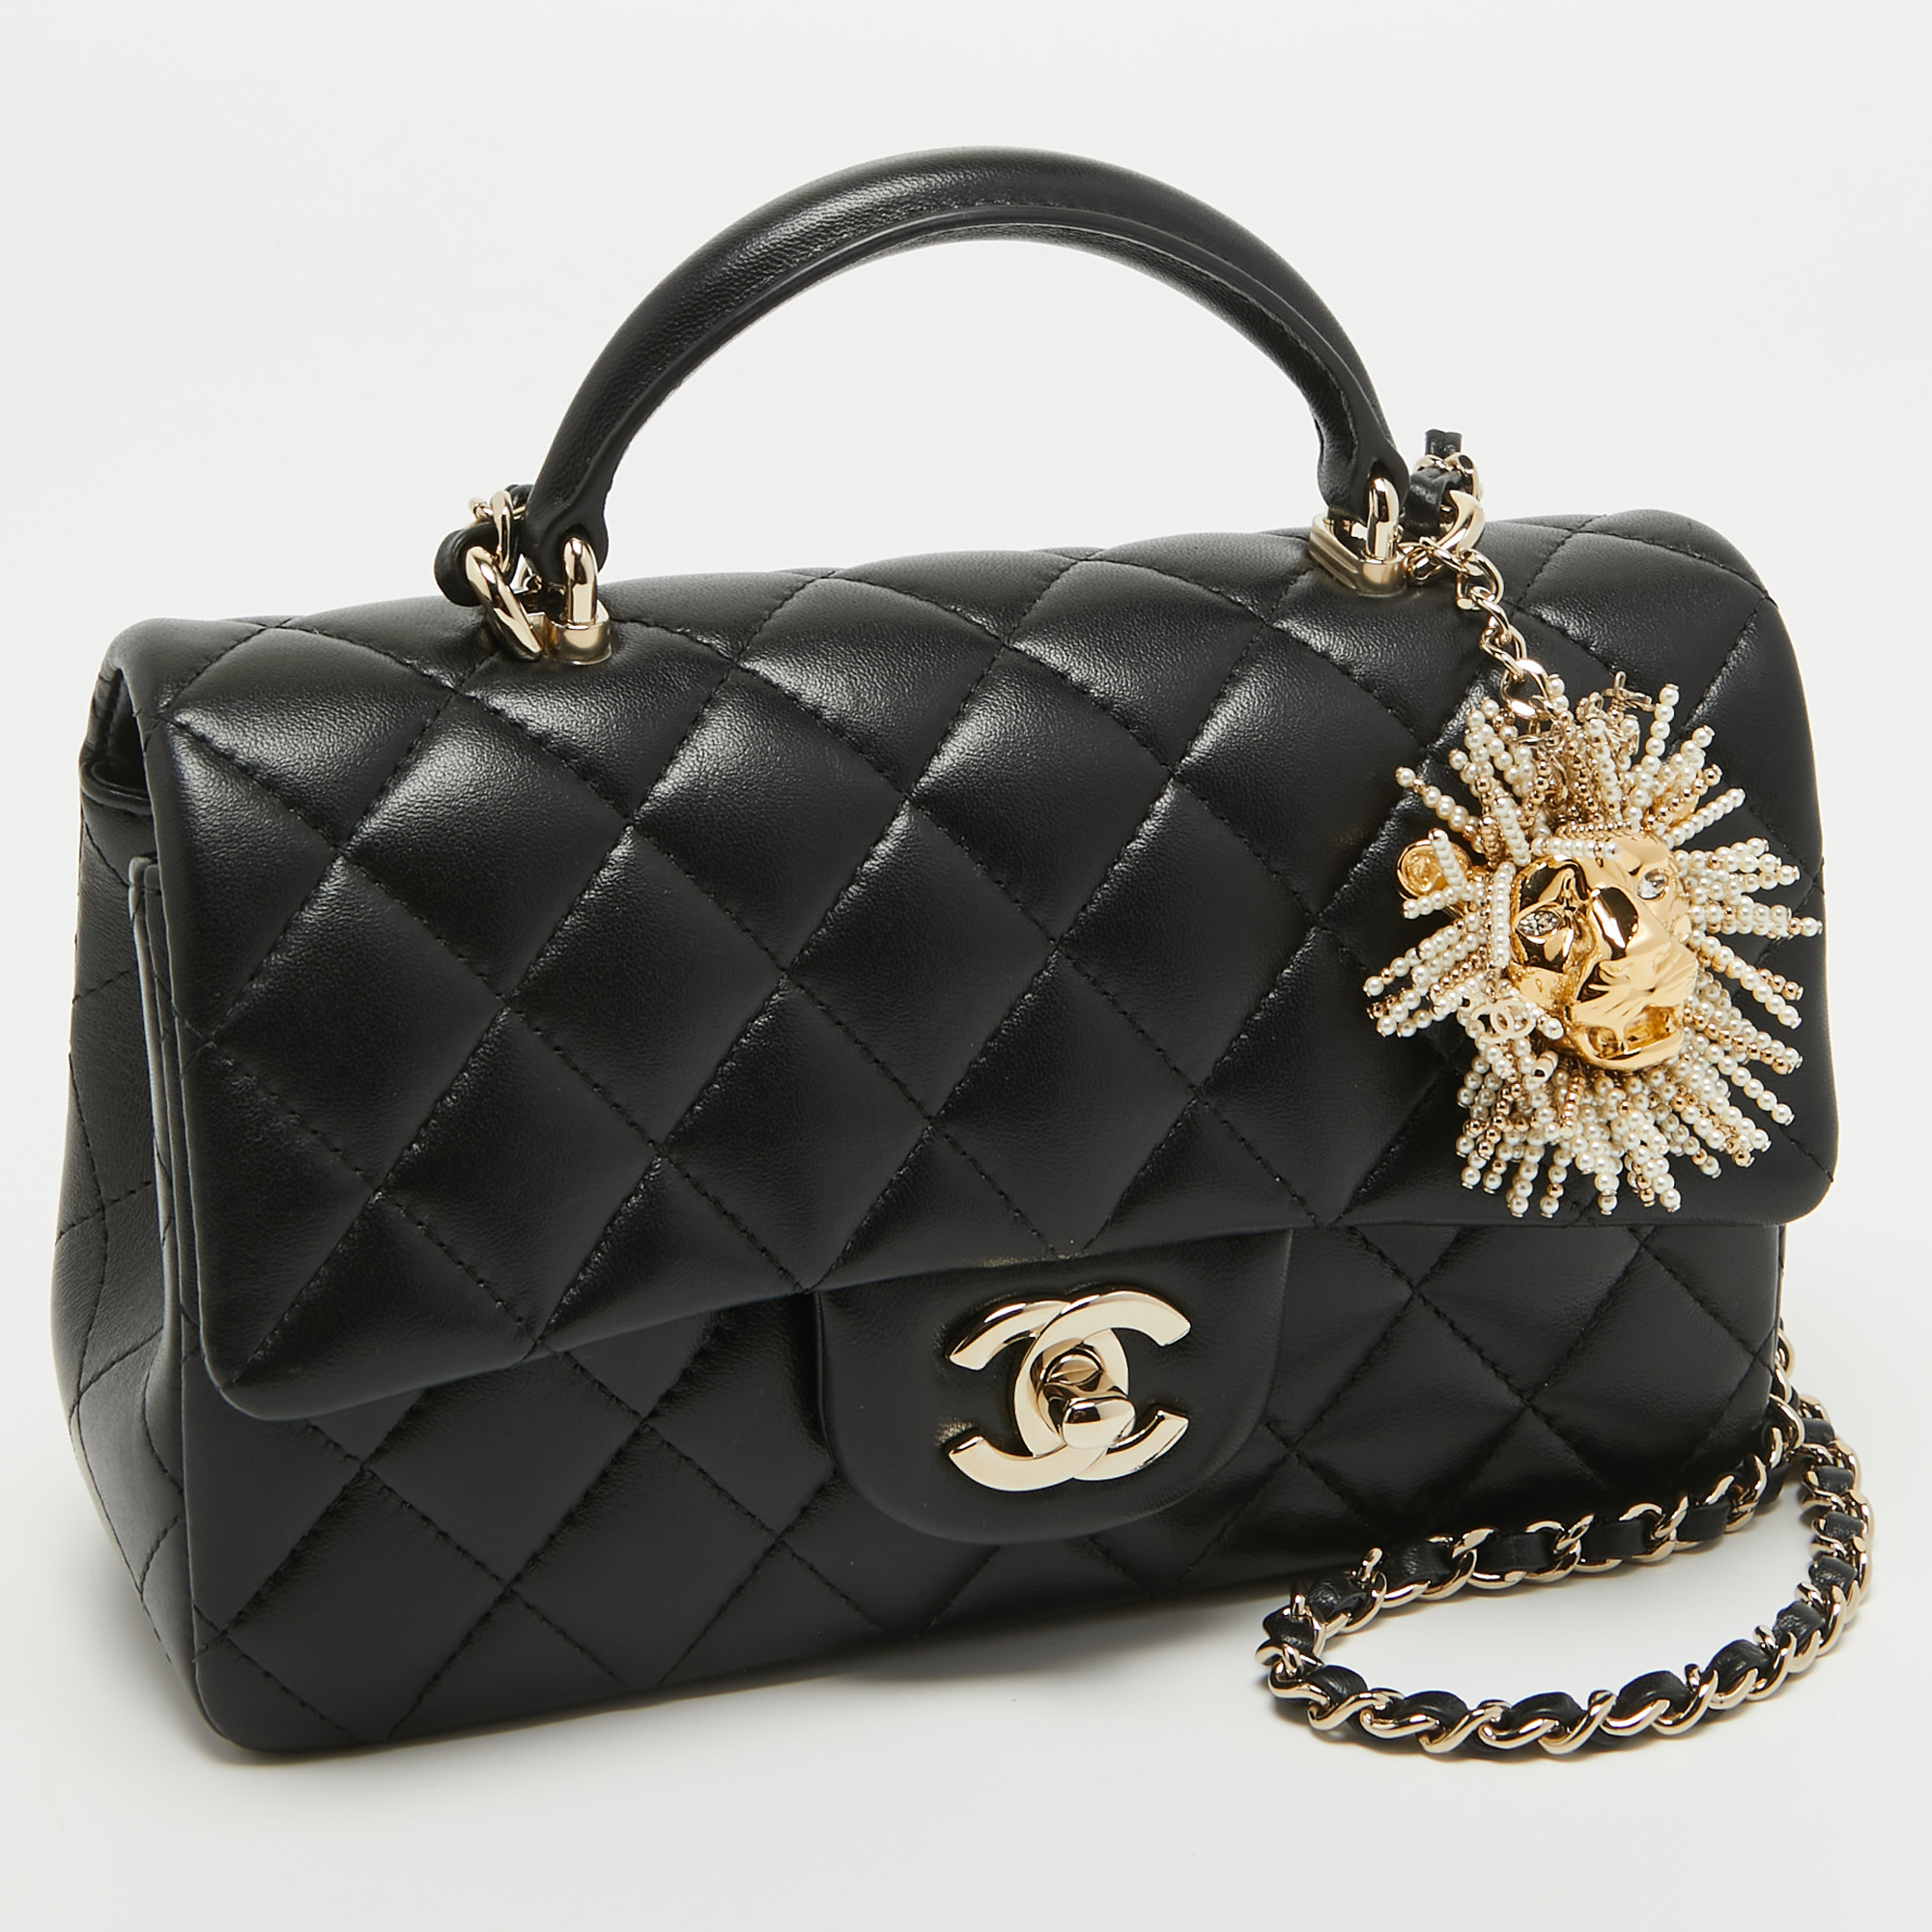 Chanel Black Quilted Leather Mini Rectangular Top Handle Bag